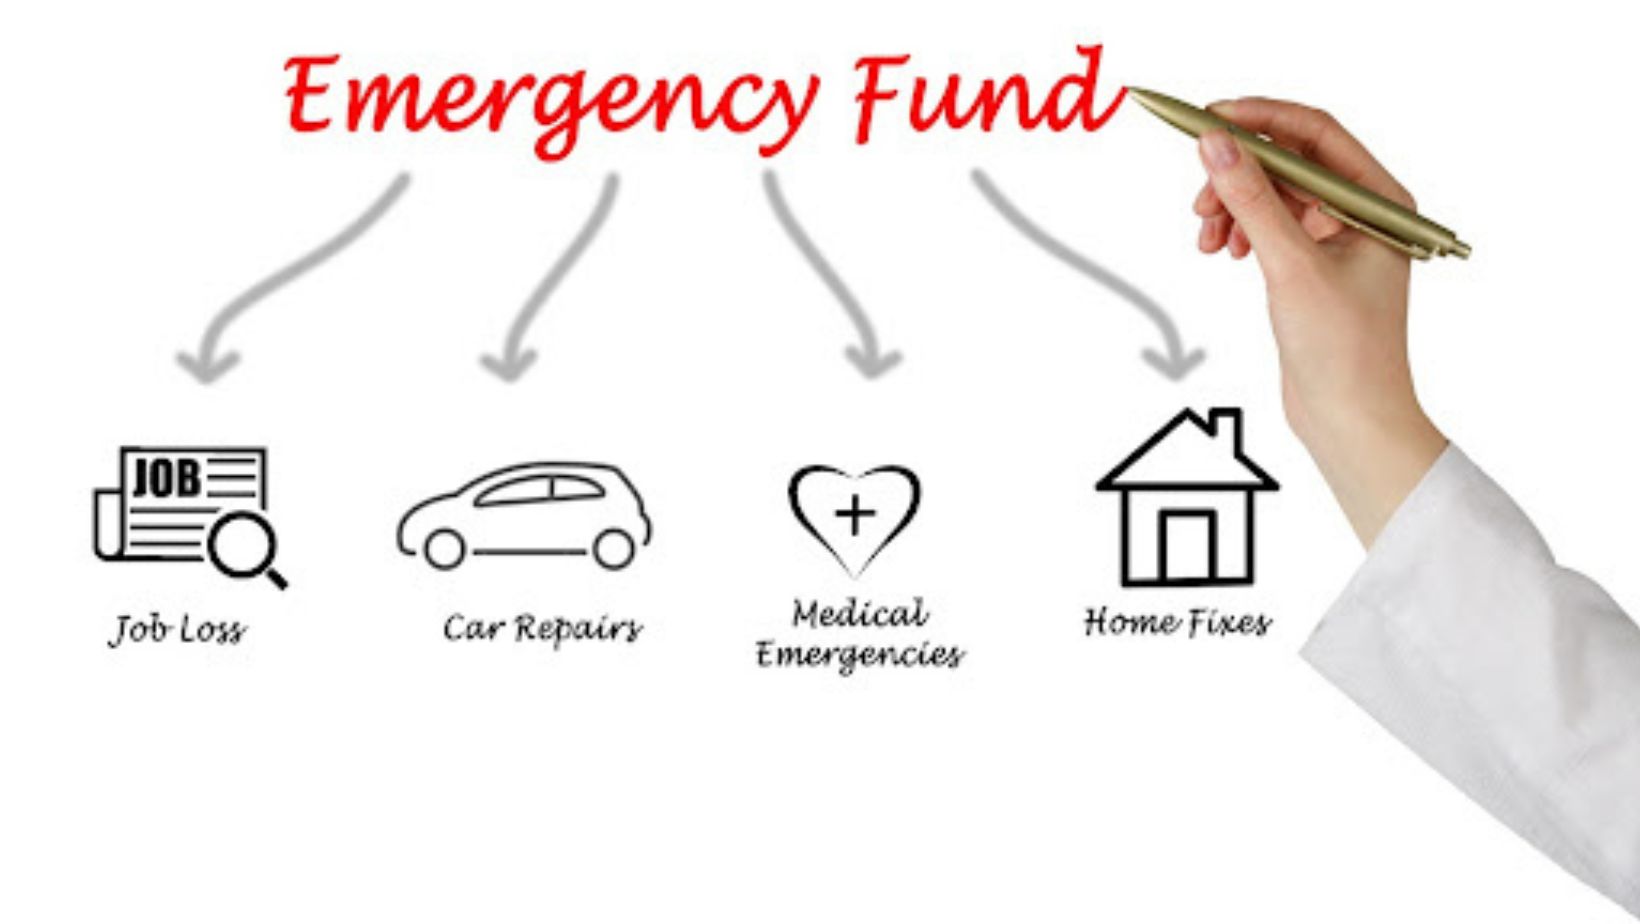 which of the following expenses would be a good reason to spend money from an emergency fund?